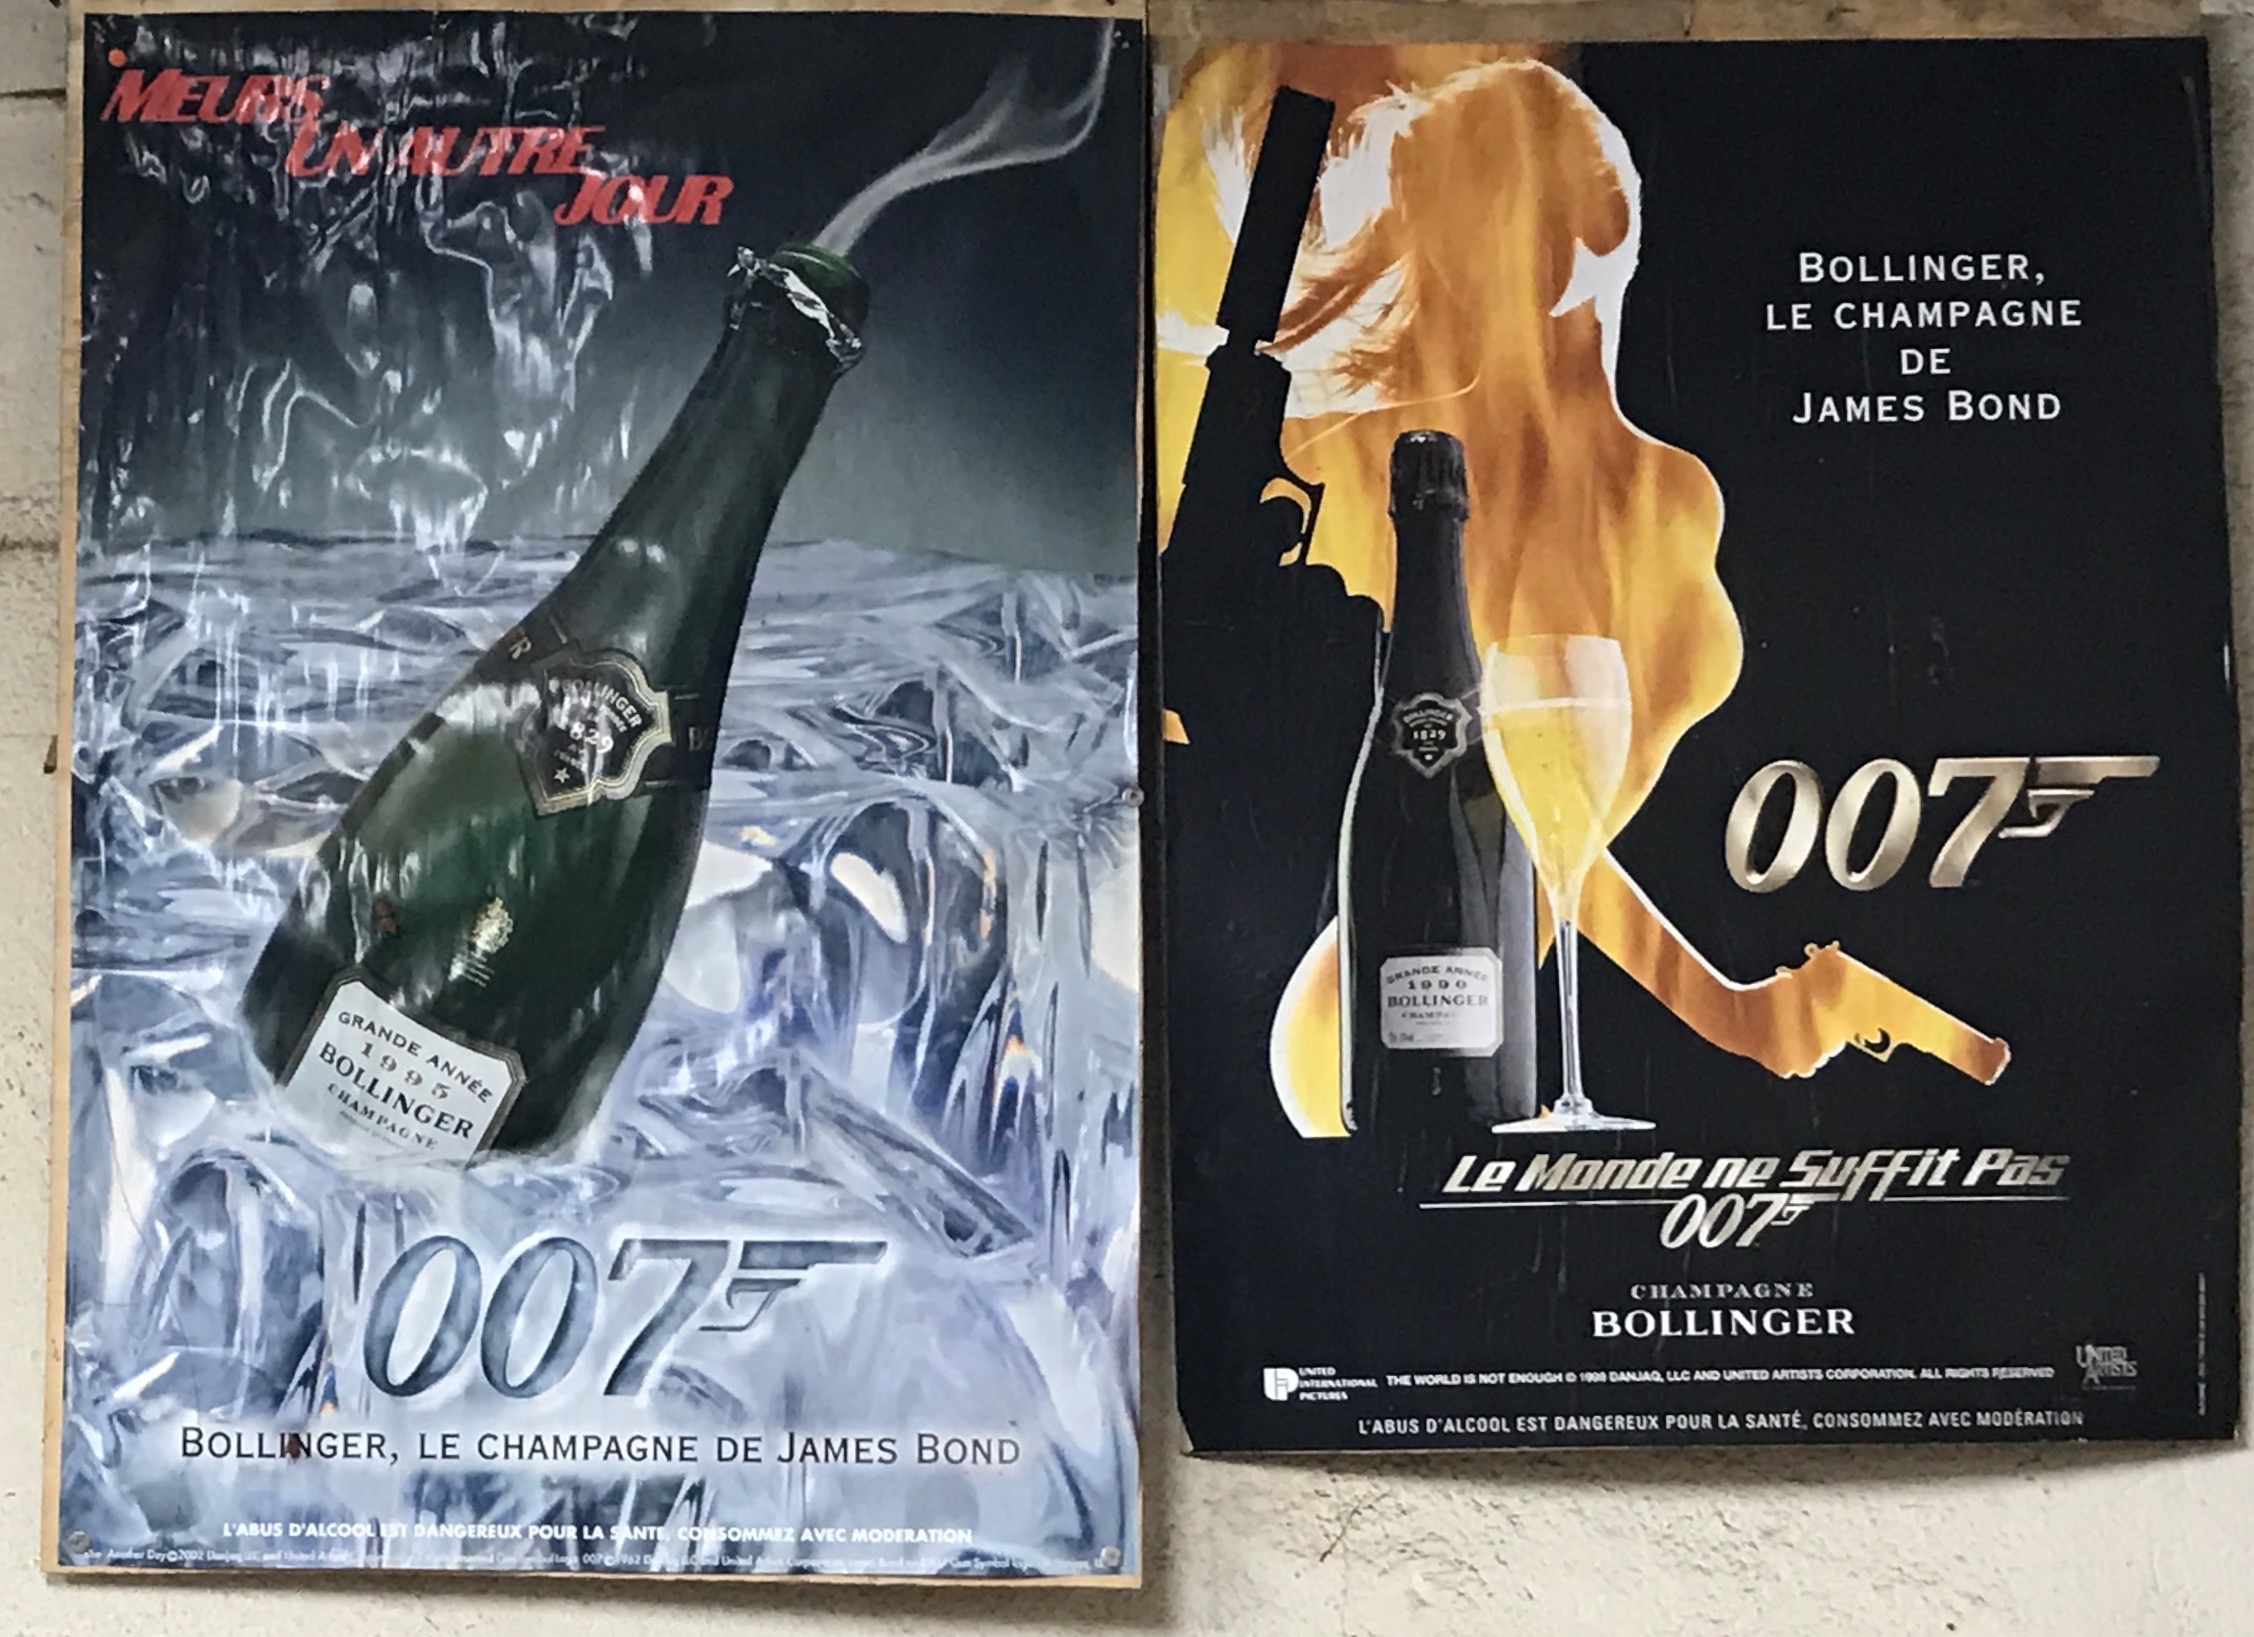 James Bond posters promoting 007’s favorite Champagne. 